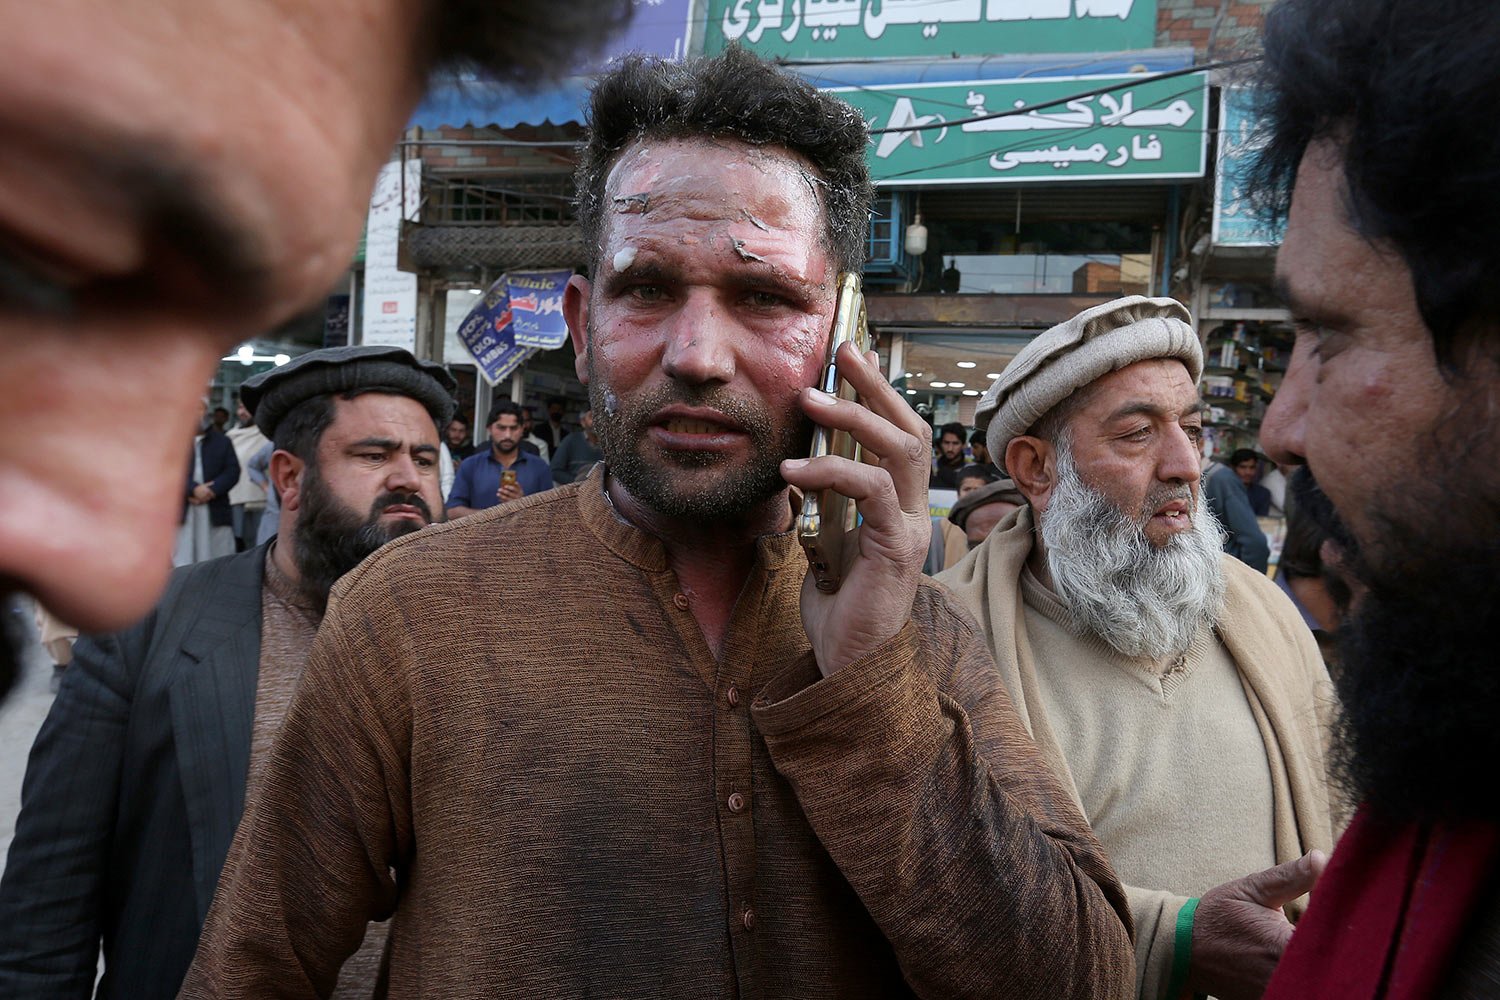  An injured victim of a suicide bombing talks on his mobile phone after getting initial treatment outside a hospital in Peshawar, Pakistan, Monday, Jan. 30, 2023.  (AP Photo/Muhammad Sajjad) 